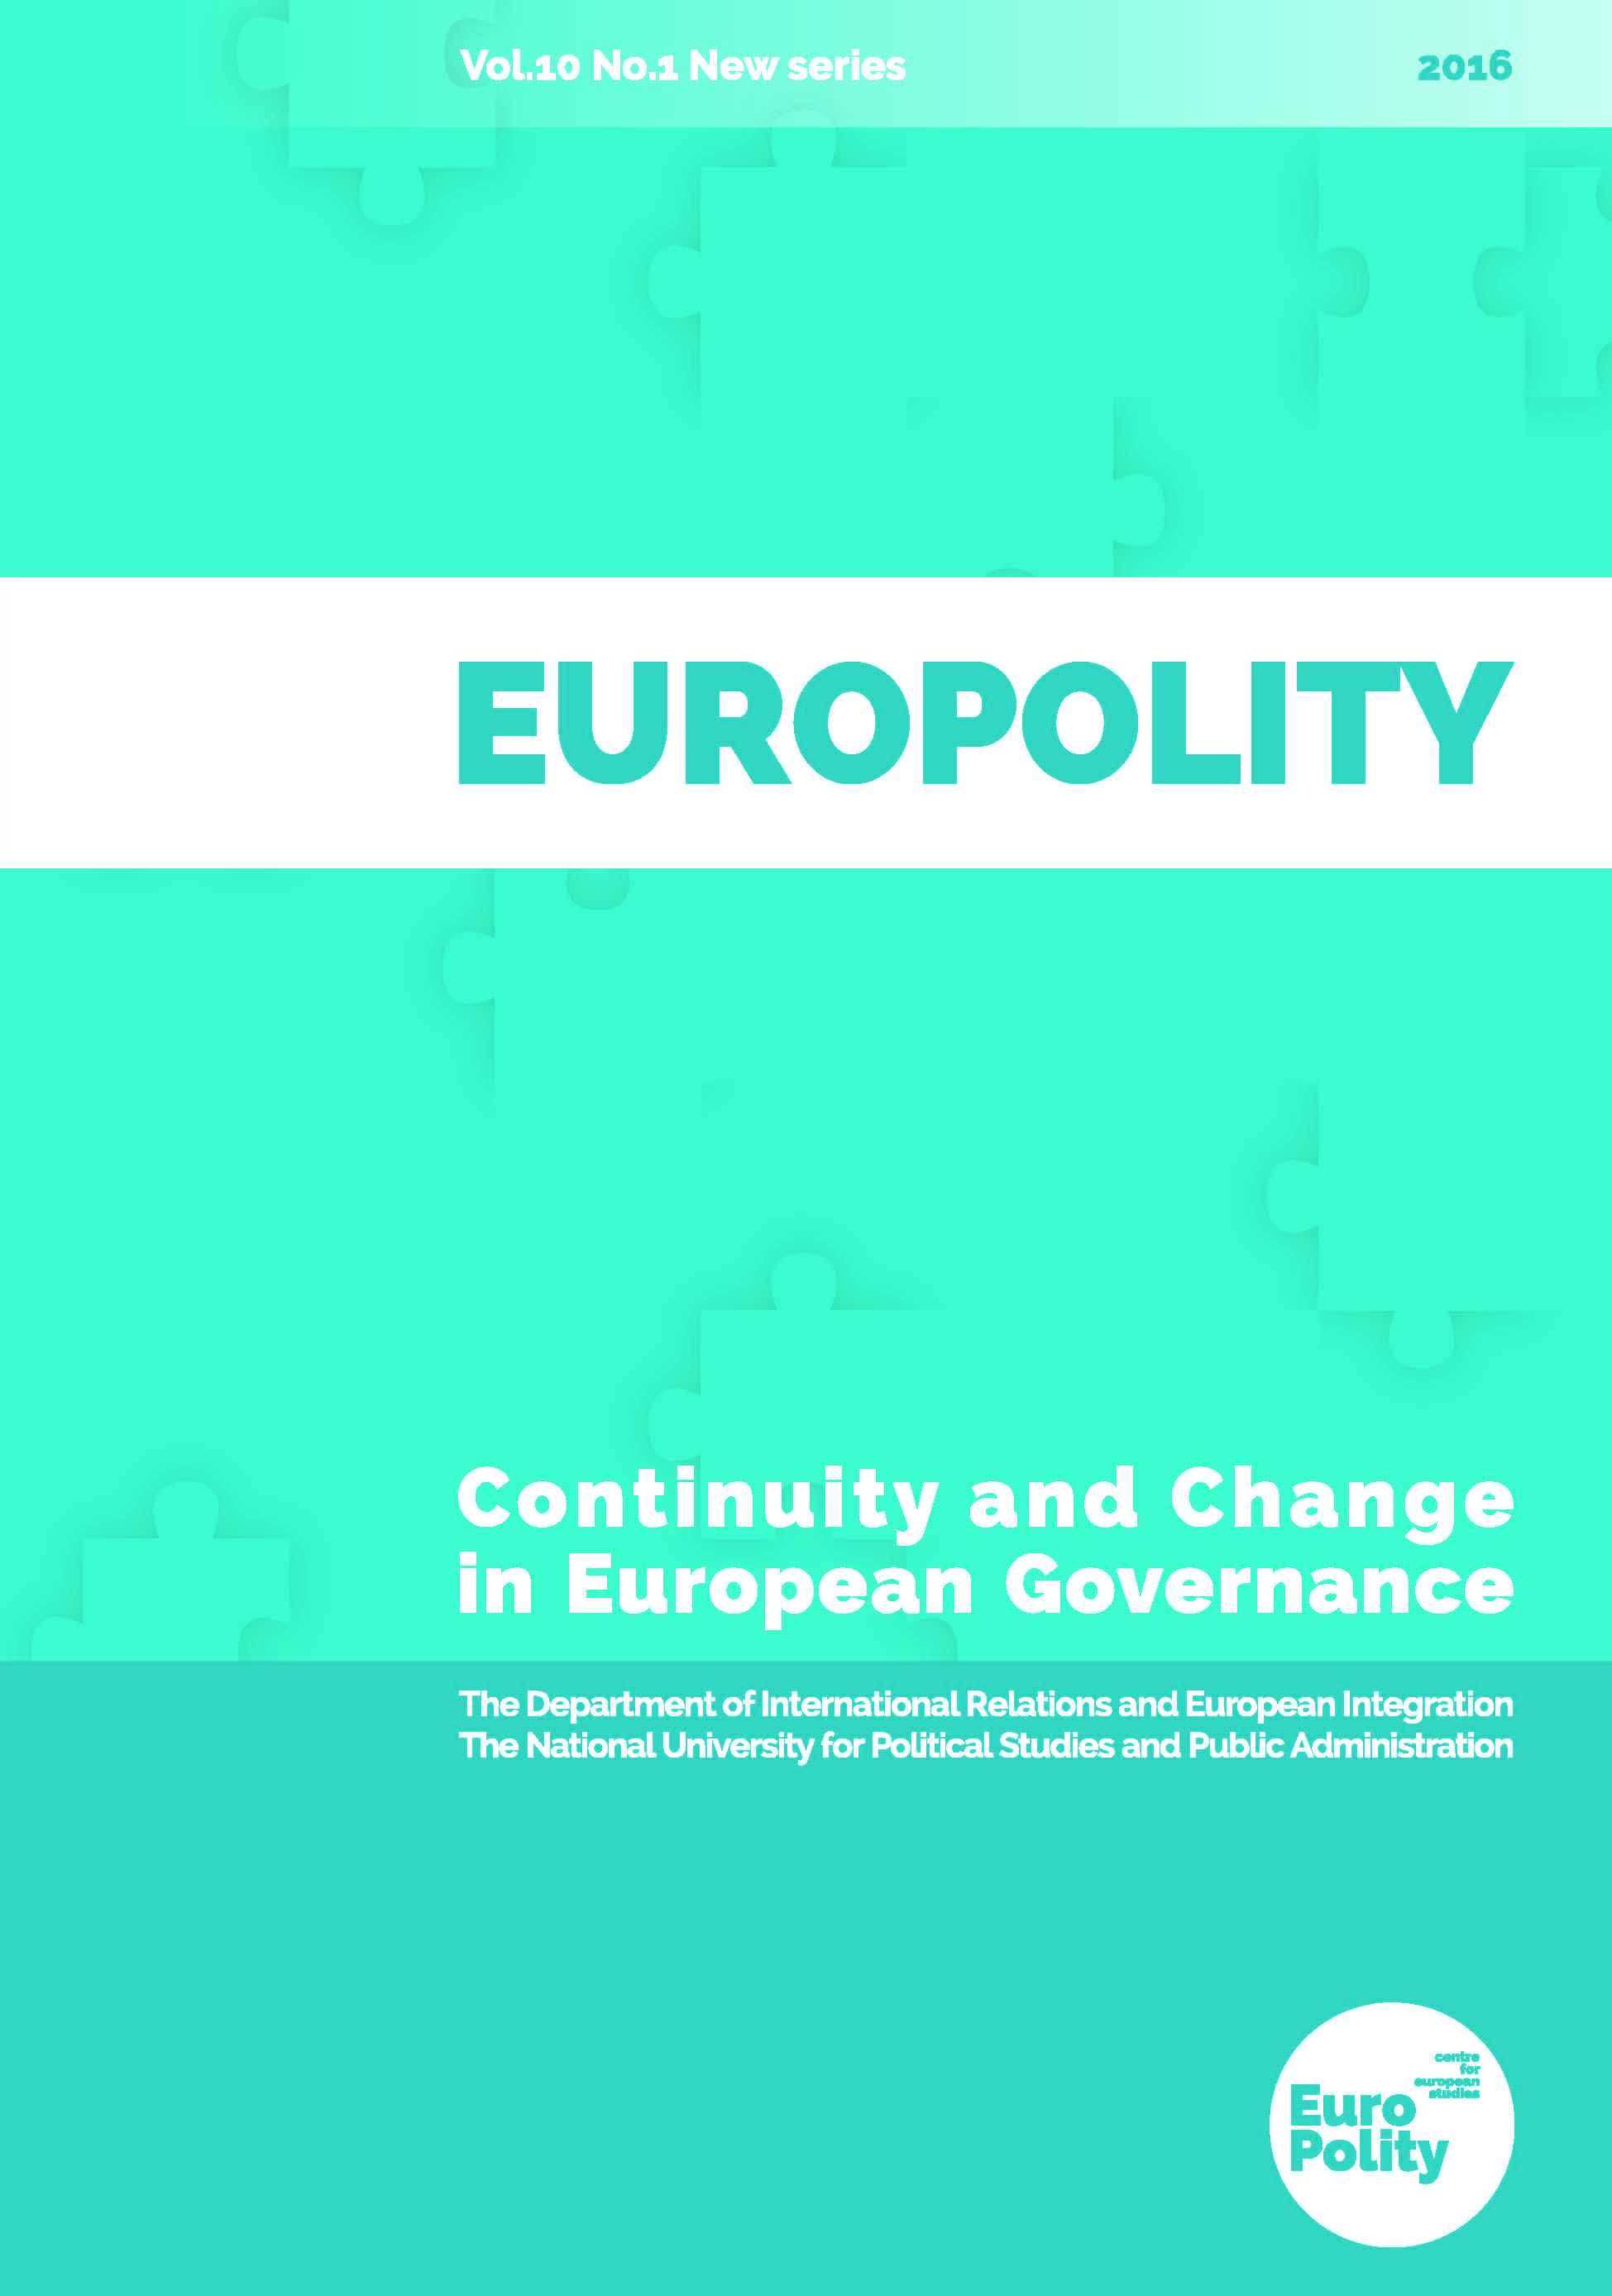 THE SOLIDARITY CLAUSE IN THE EUROPEAN UNION TREATY AS A HUMAN SECURITY VECTOR. A FAREWELL TO TERRORISM OR LEGITIMIZATION OF INFERENCE IN INTERNAL AFFAIRS? Cover Image